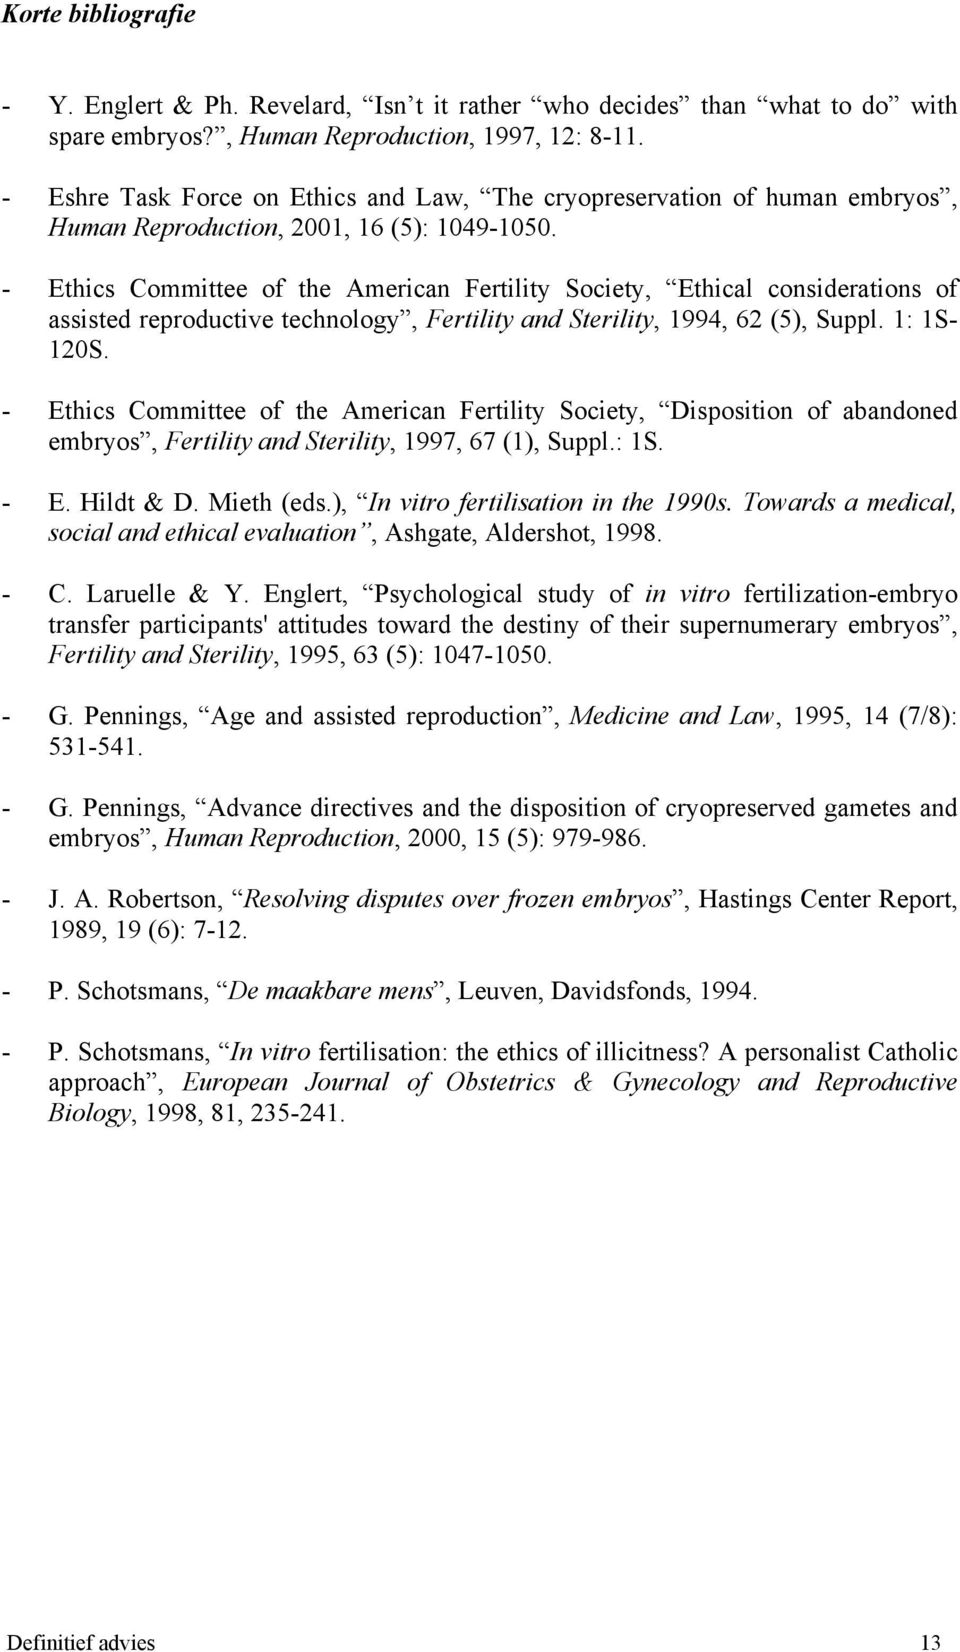 - Ethics Committee of the American Fertility Society, Ethical considerations of assisted reproductive technology, Fertility and Sterility, 1994, 62 (5), Suppl. 1: 1S- 120S.